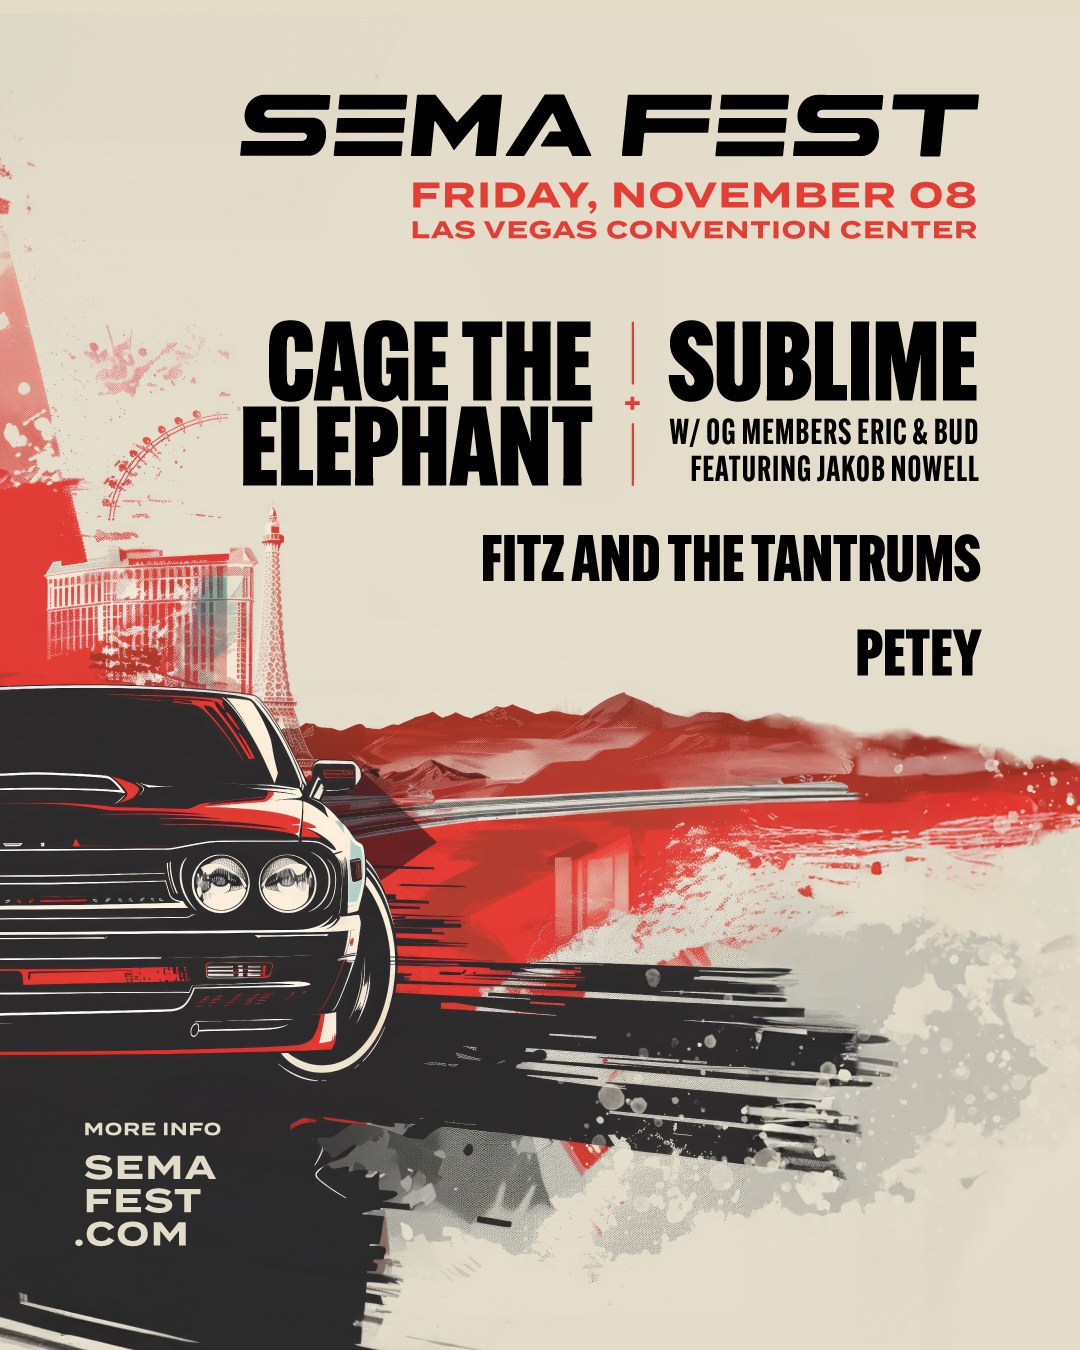 SEMA Fest Returns To Las Vegas Friday, November 8 With Headliners Cage The Elephant And Sublime